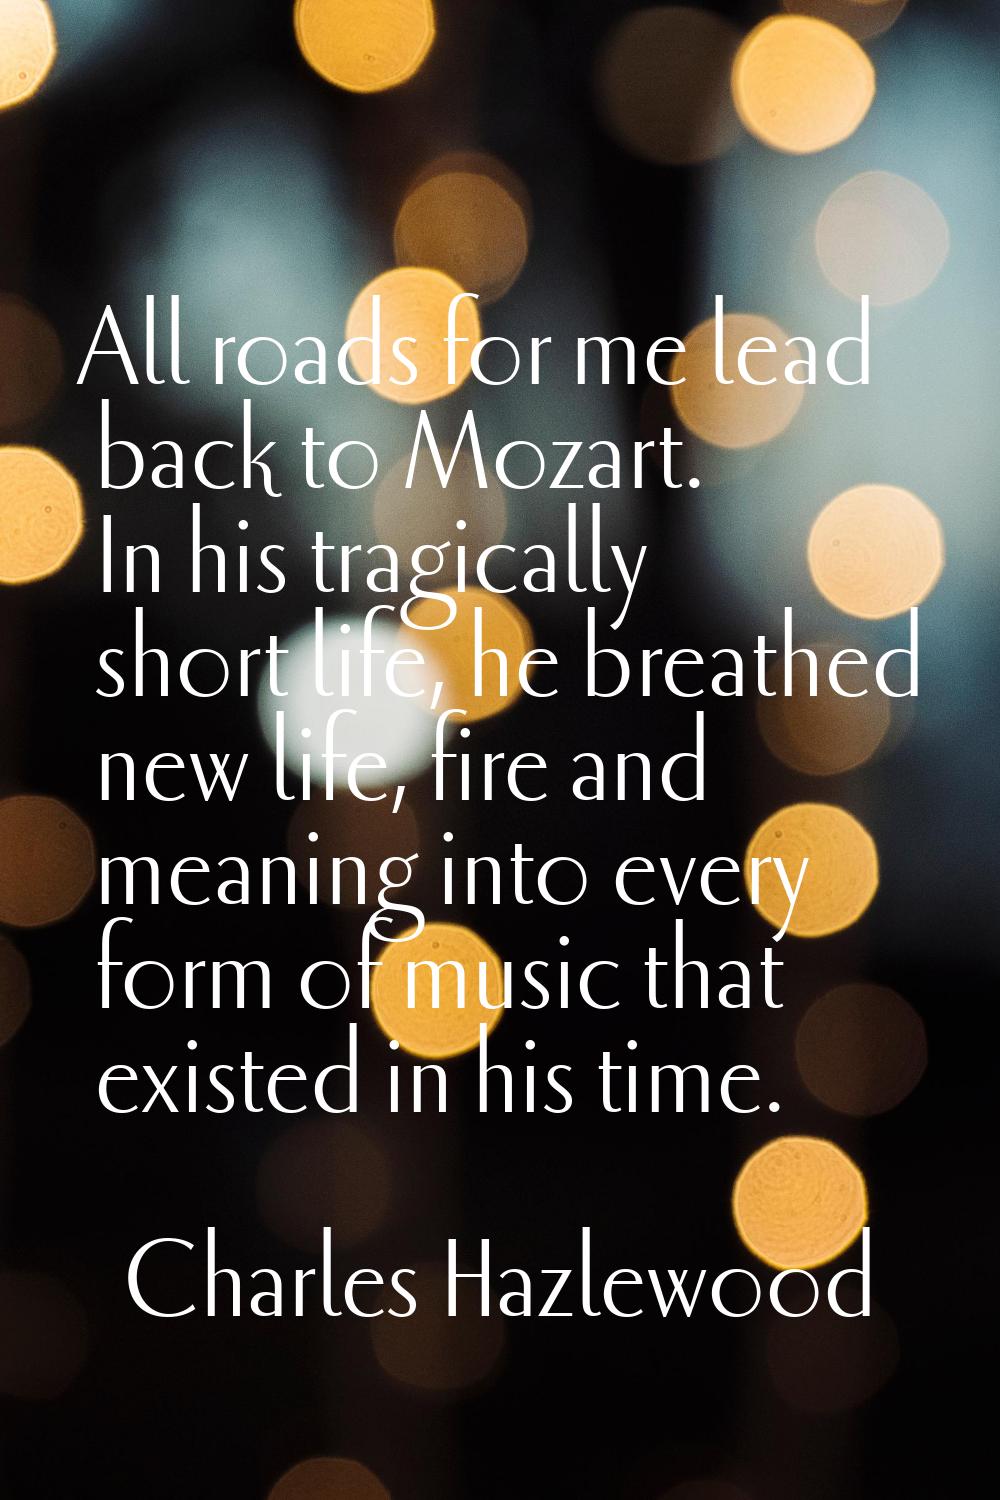 All roads for me lead back to Mozart. In his tragically short life, he breathed new life, fire and 